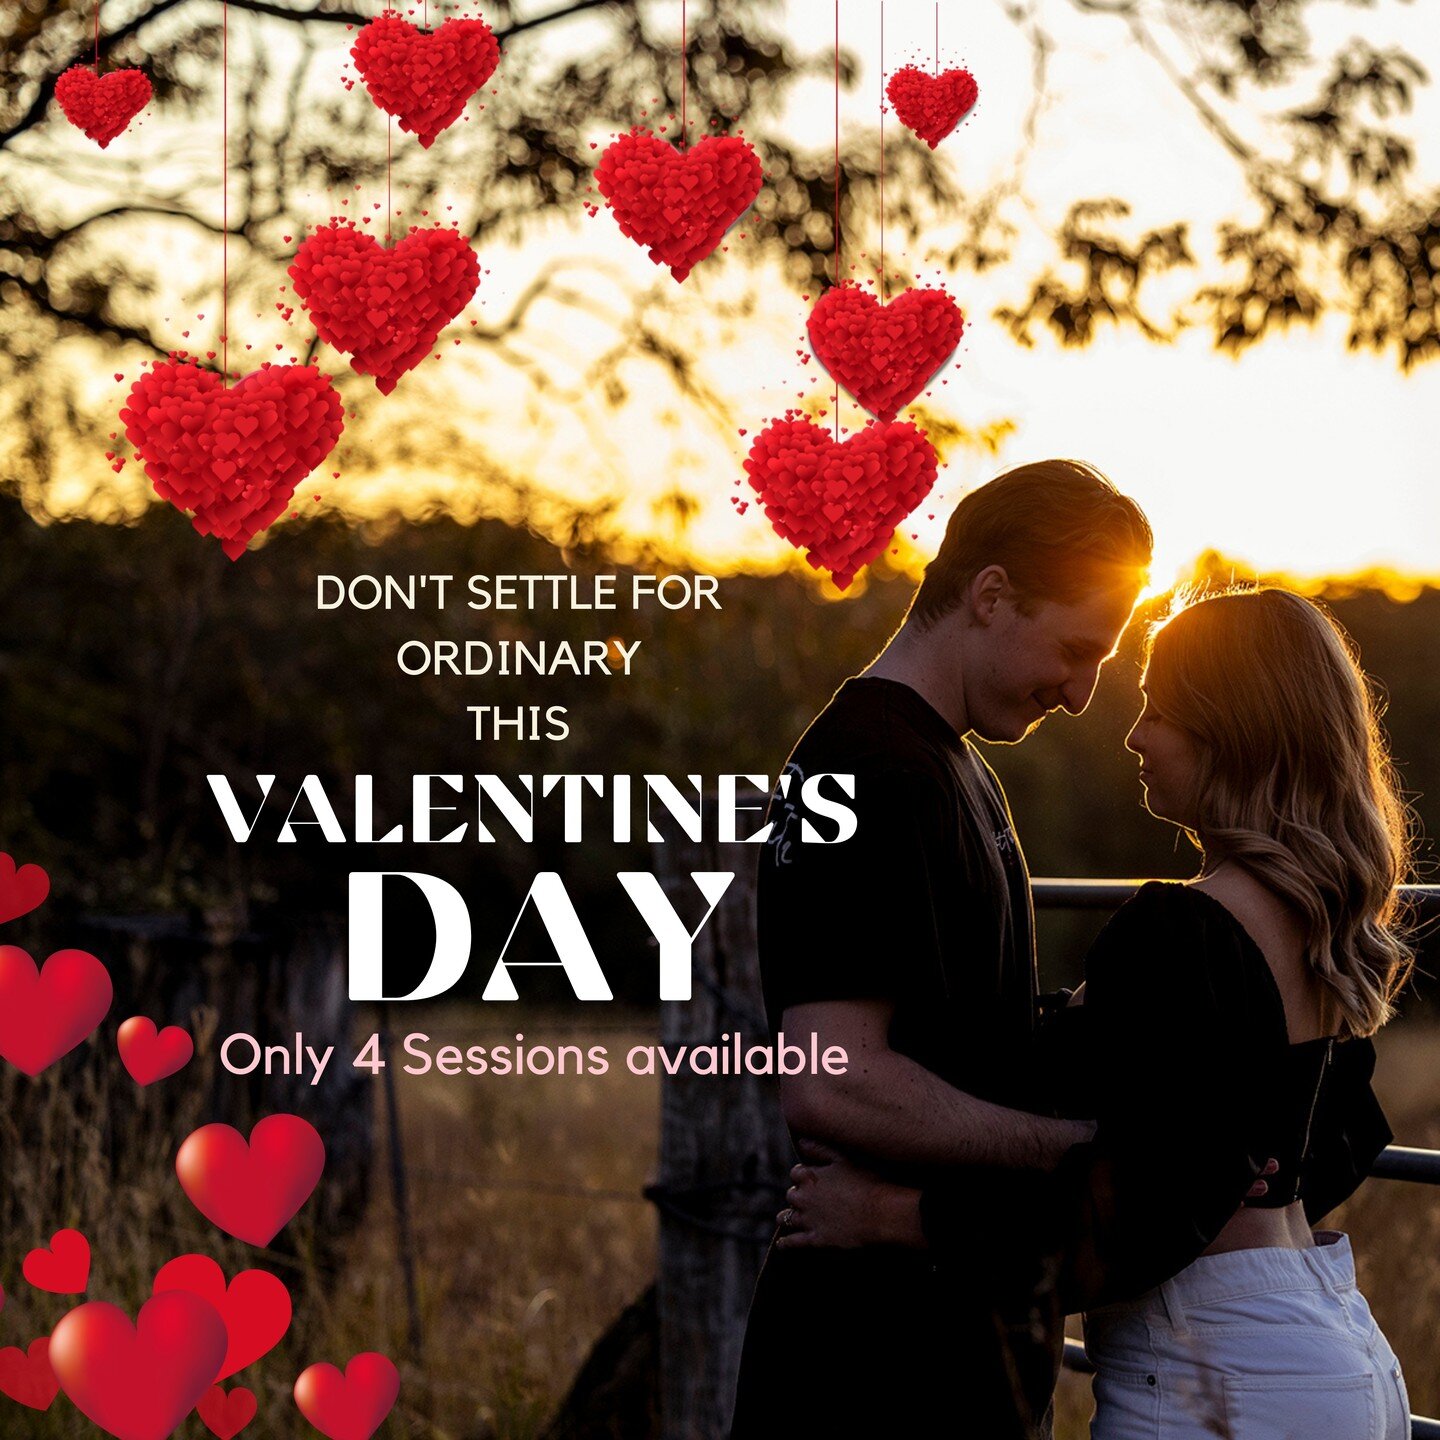 ❤️Valentine's Day❤️ Don't settle for ordinary this Valentine's Day
MAKE THE CELEBRATION OF YOUR LOVE A TRULY MEMORABLE EXPERIENCE FOR JUST $395 (valued at $845). 
Only 4 Sessions Available 
Click on the link below for more information:
www.cheriemiss